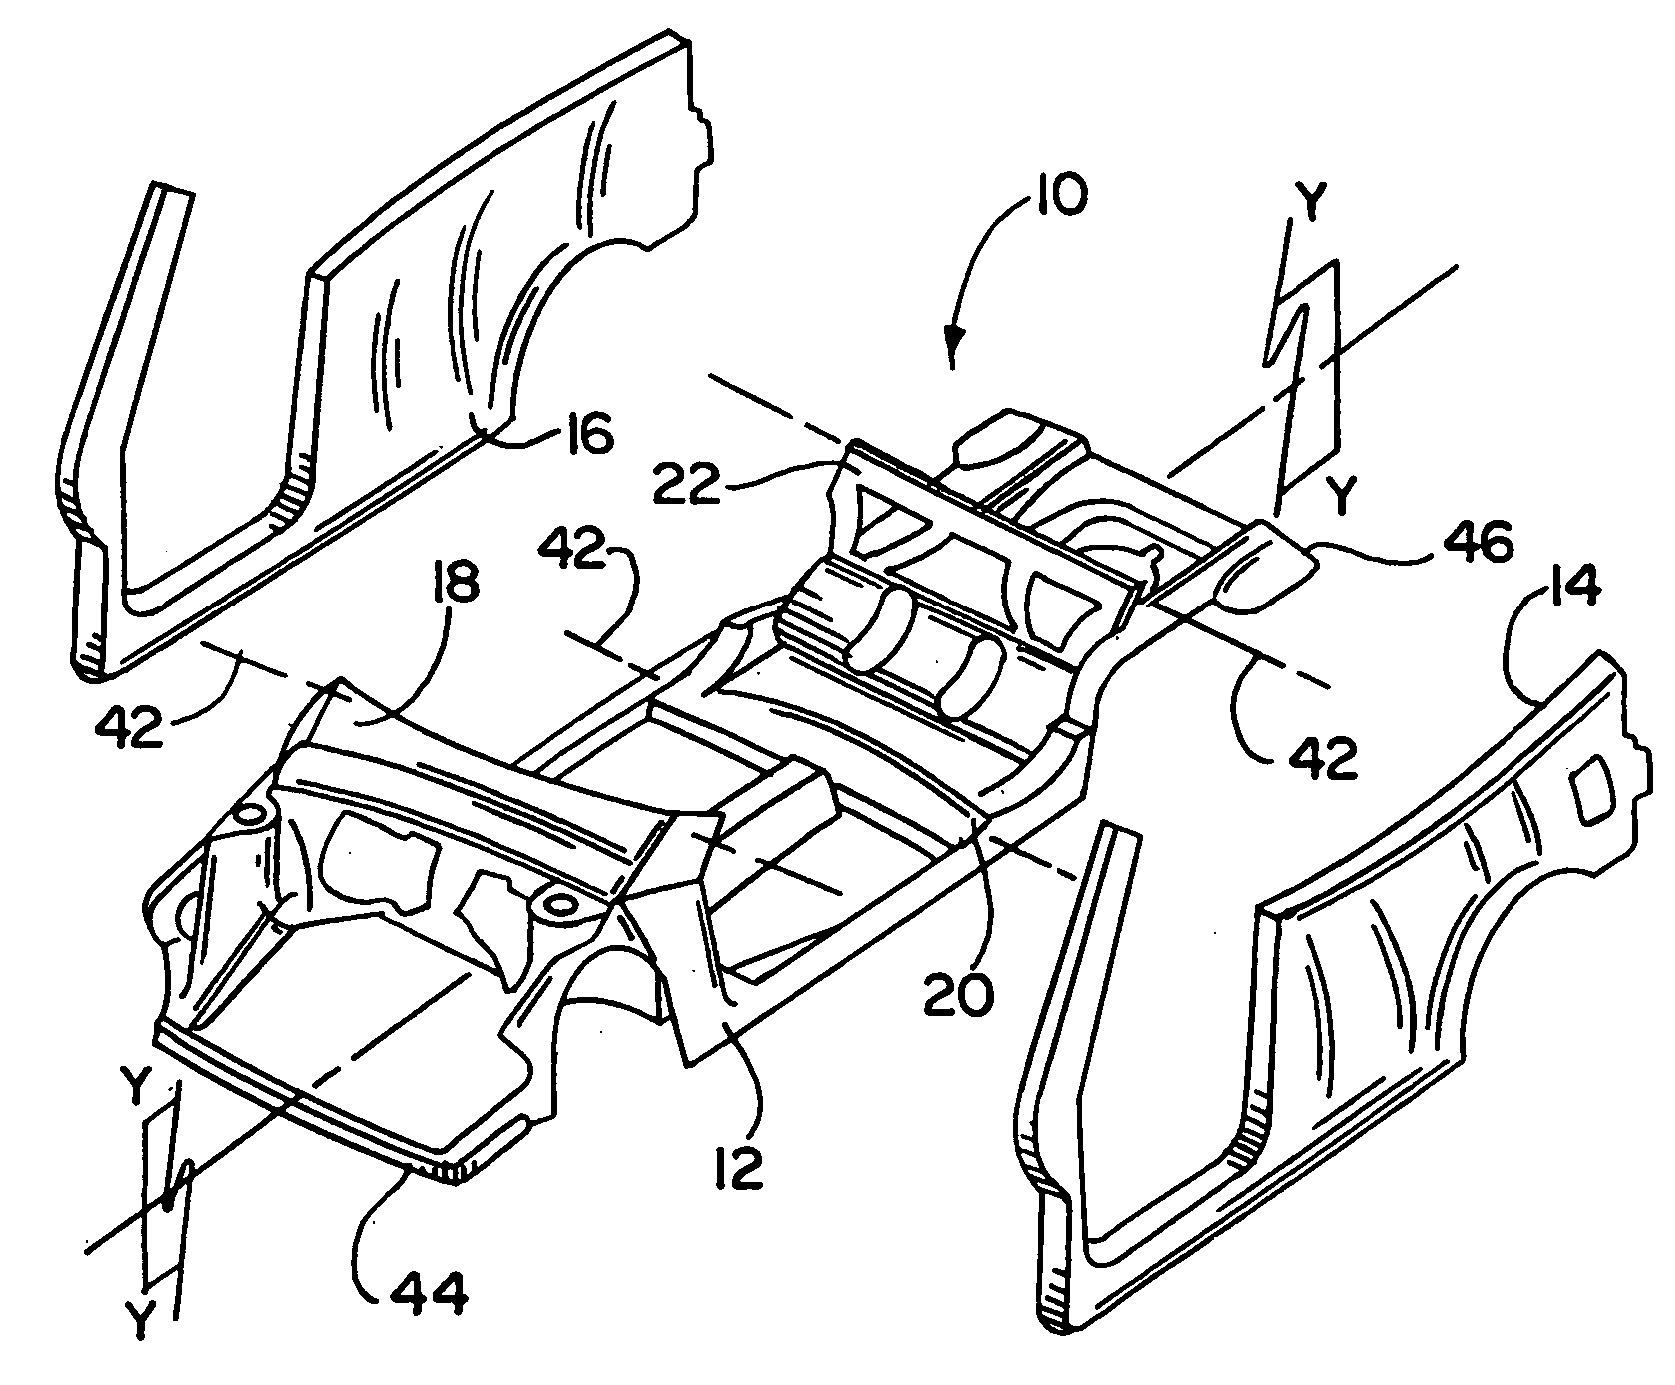 Convertible vehicle uni-body having an internal supplemental support structure